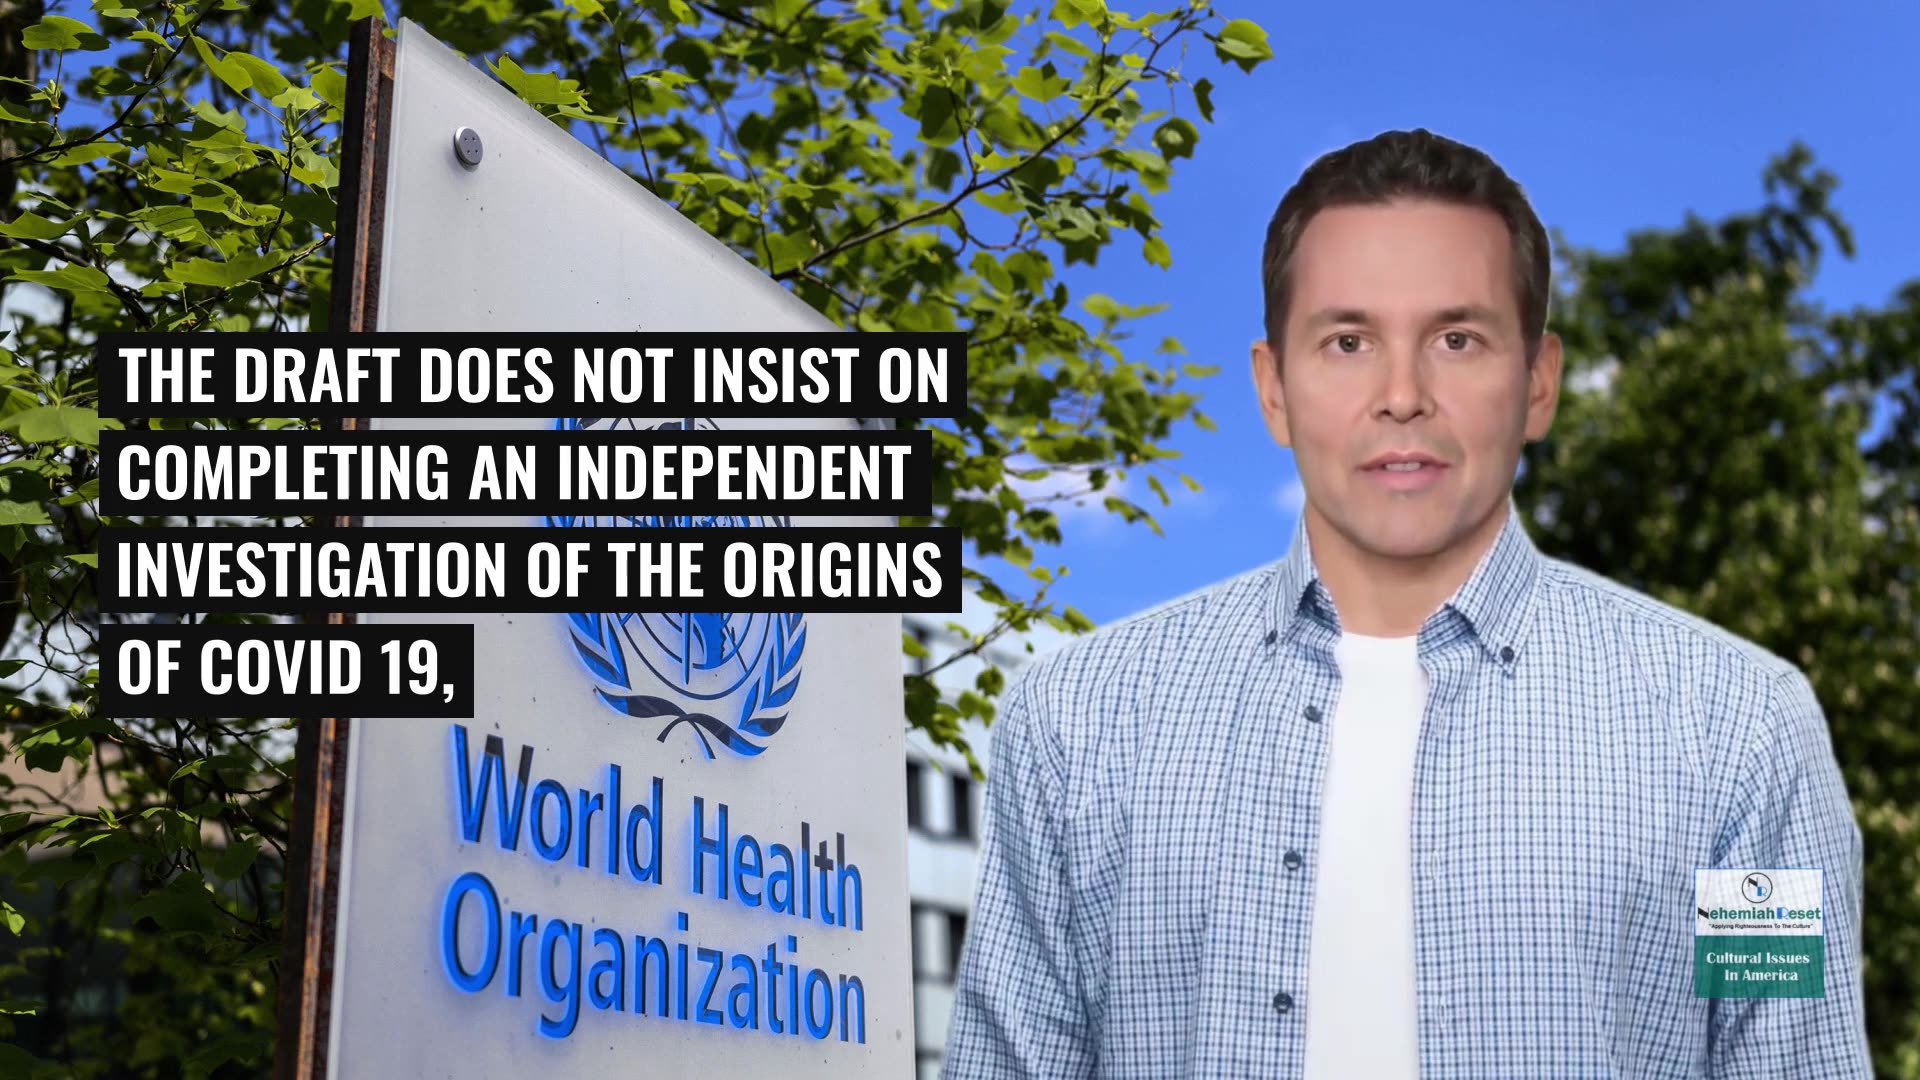 Why Is The World Health Organization Draft Document A Problem?